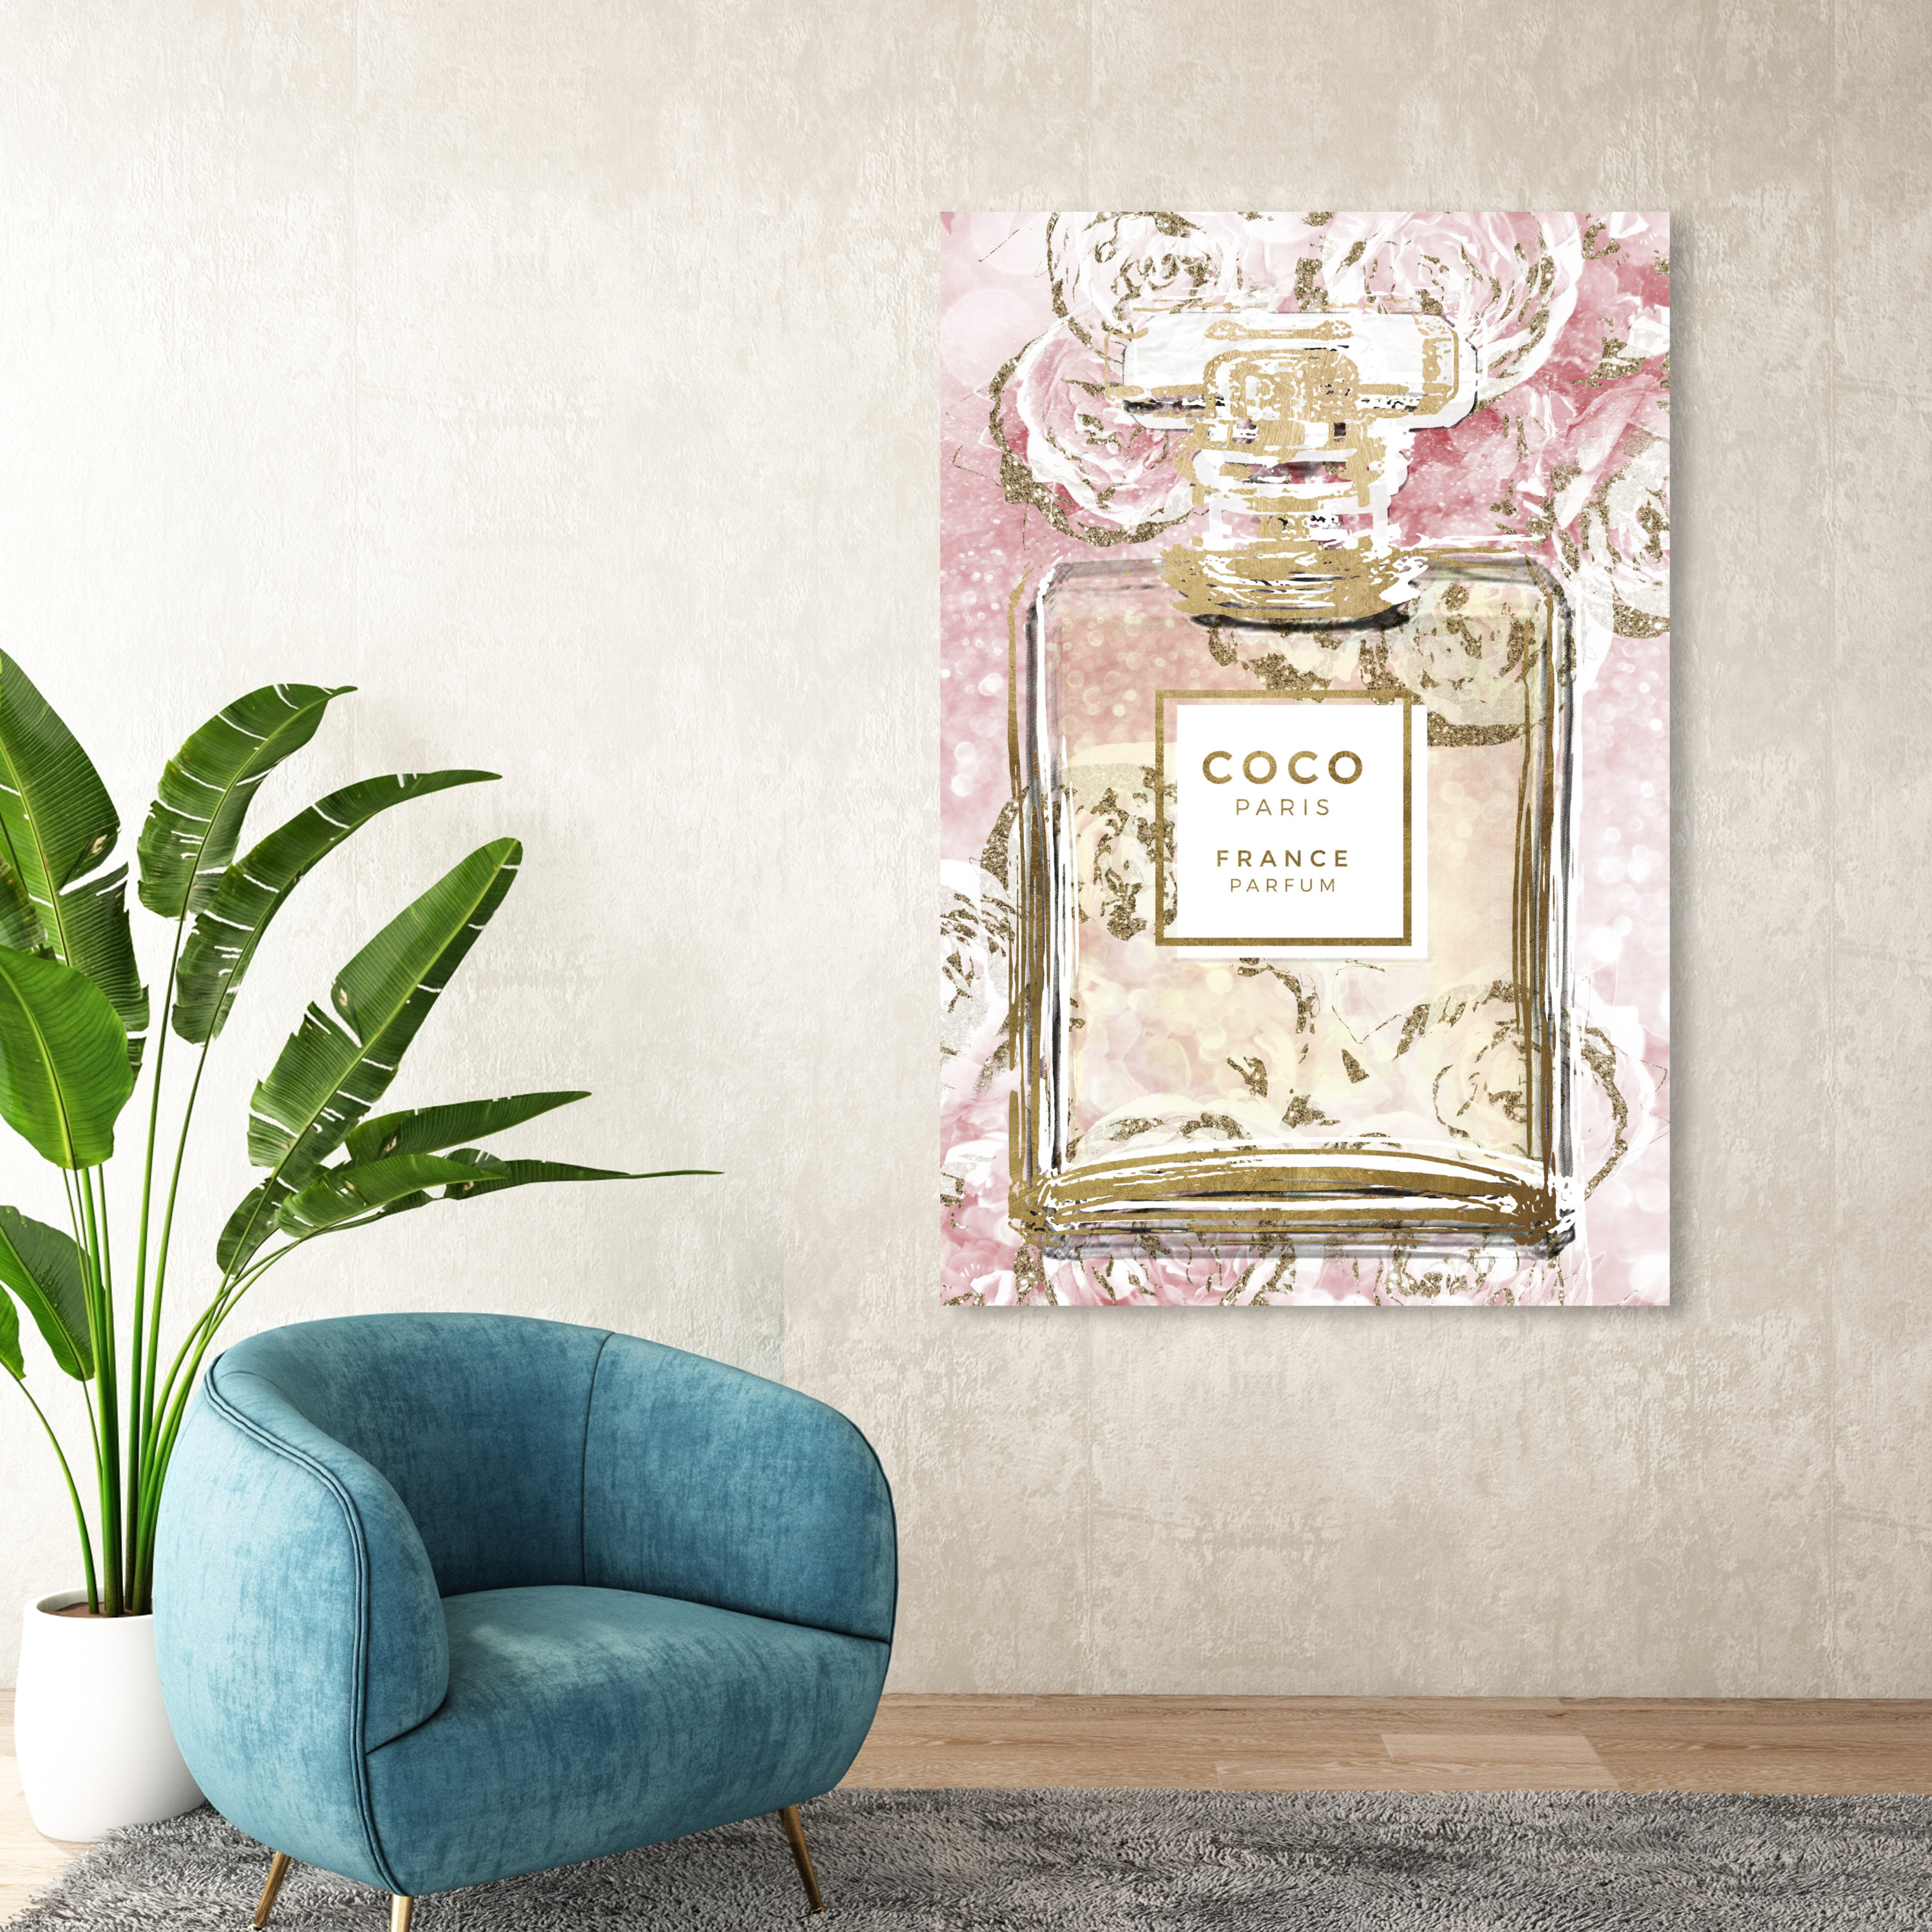 Oliver Gal Fashion and Glam Wall Art Framed Canvas Prints 'Coco Essentials'  Perfumes - Black, White - Bed Bath & Beyond - 30896244